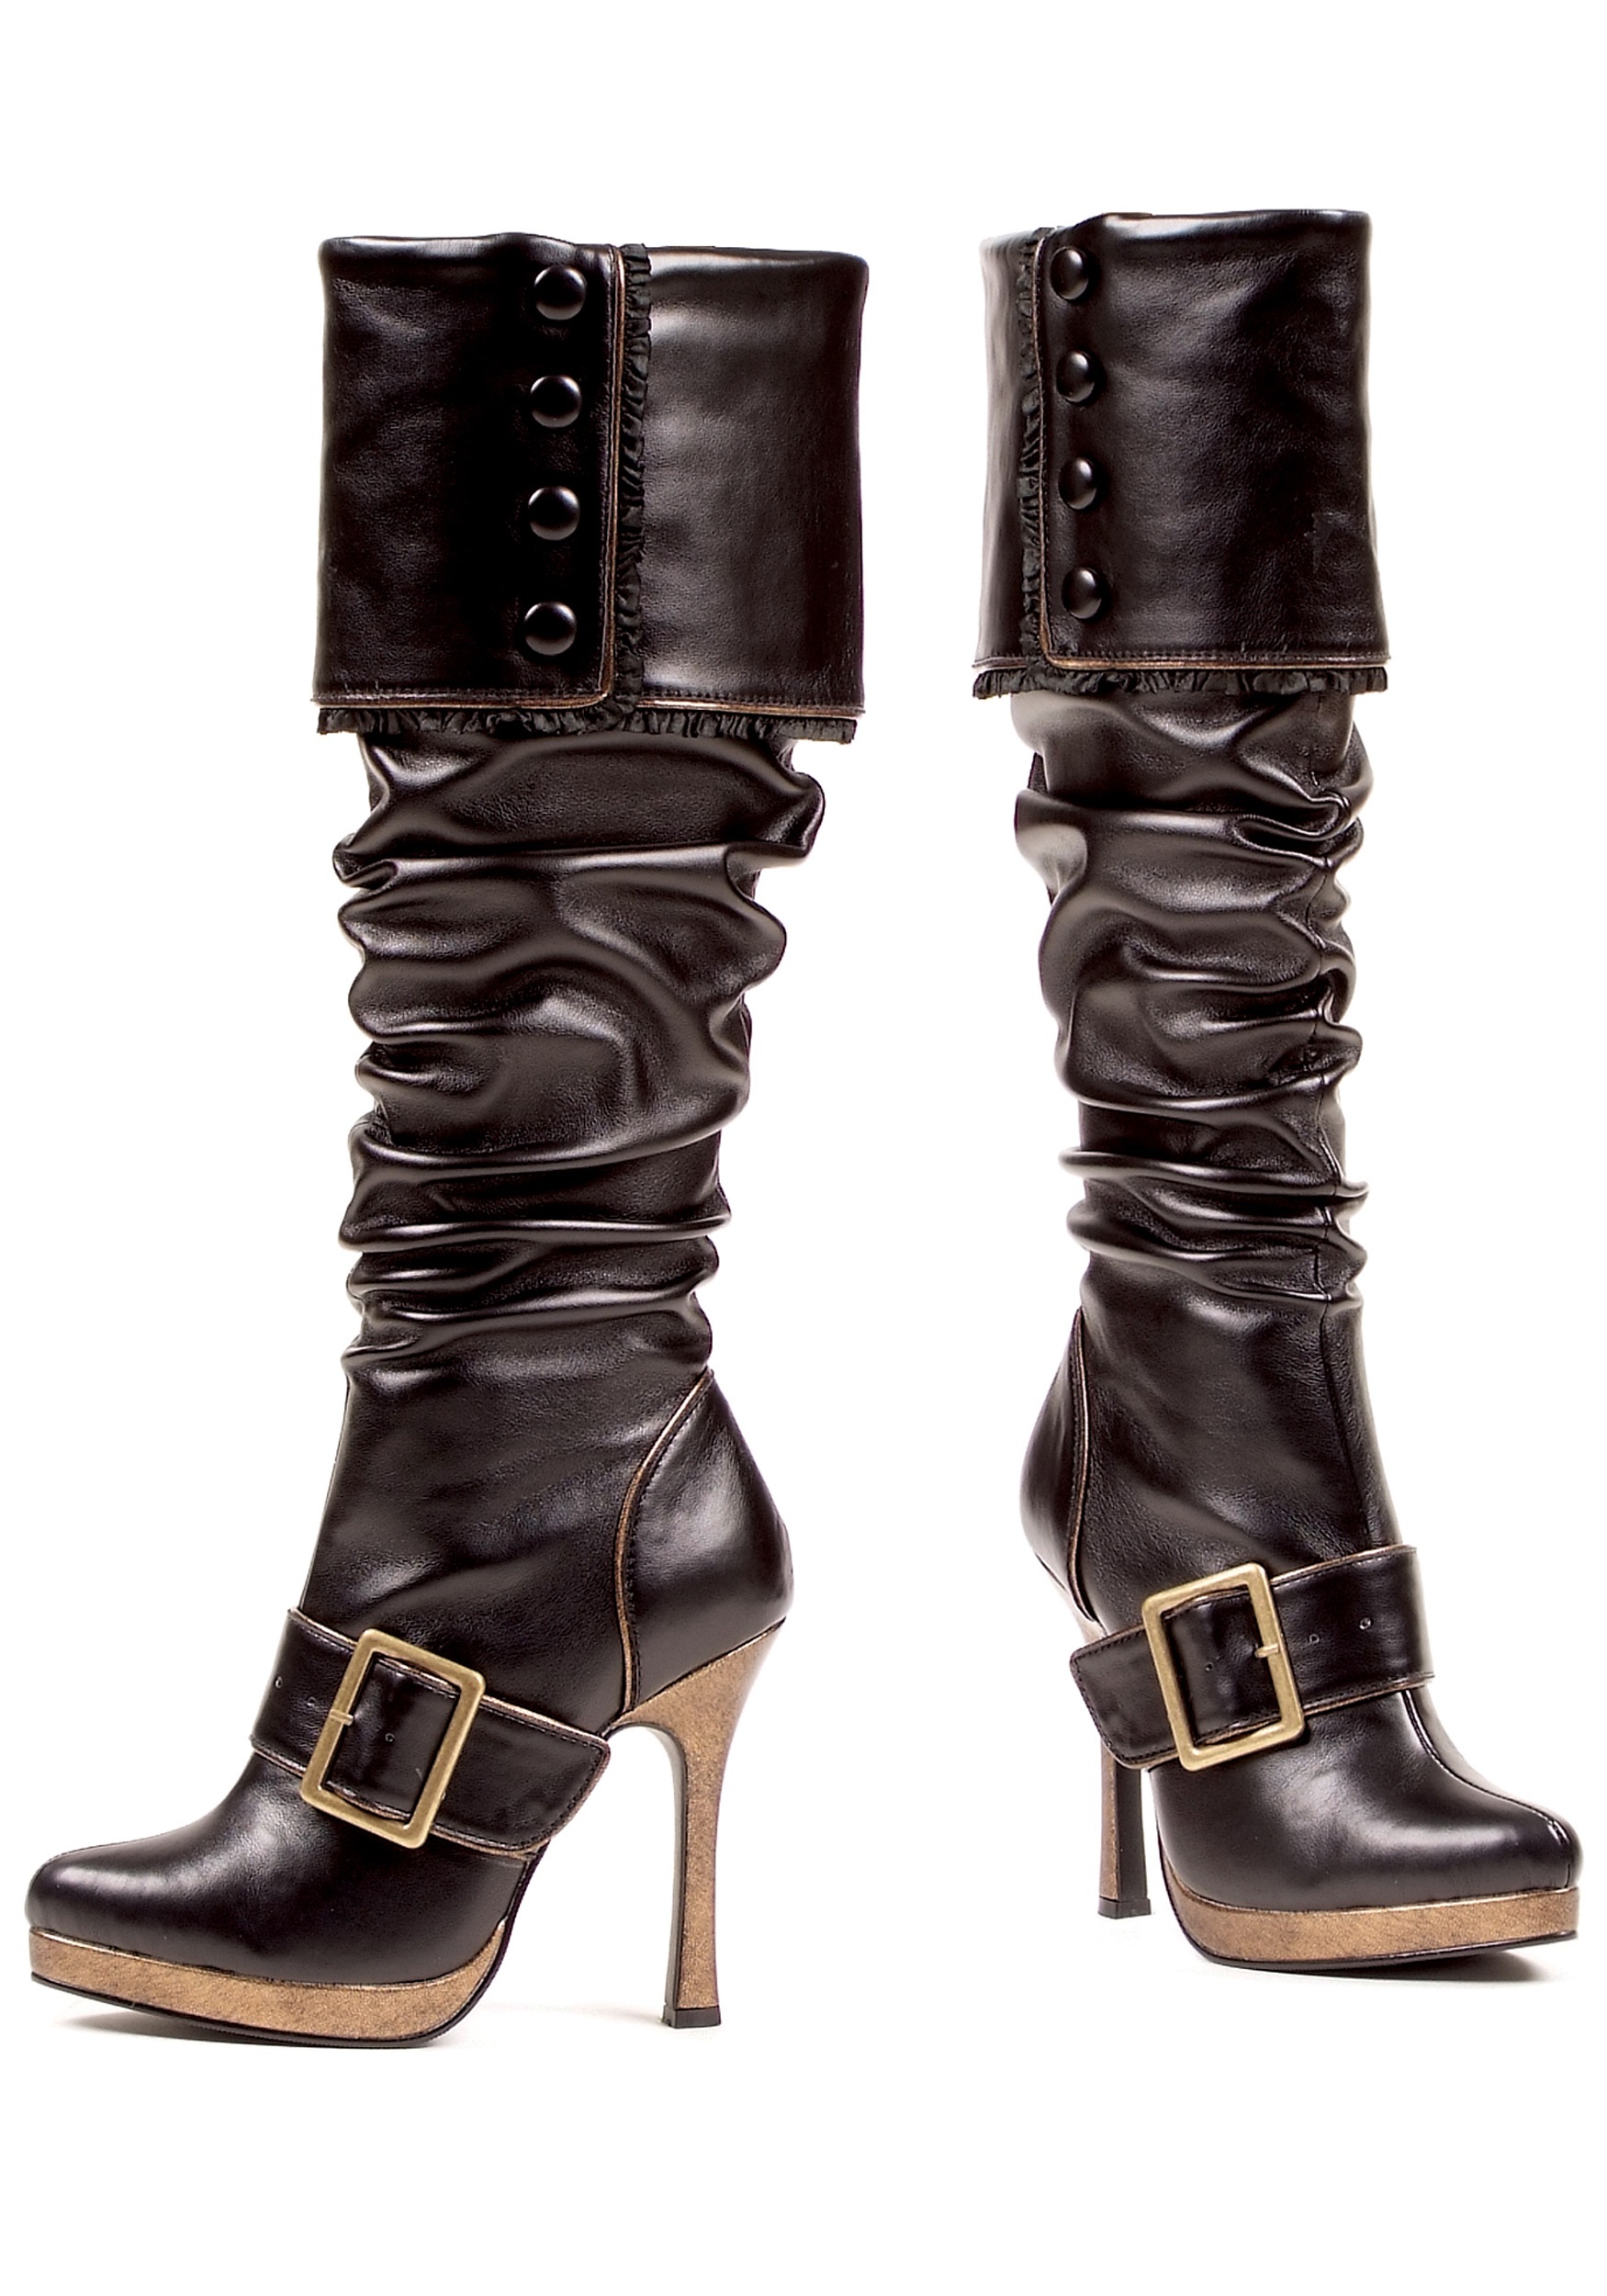 Women's Sexy Buckle Pirate Costume Boots